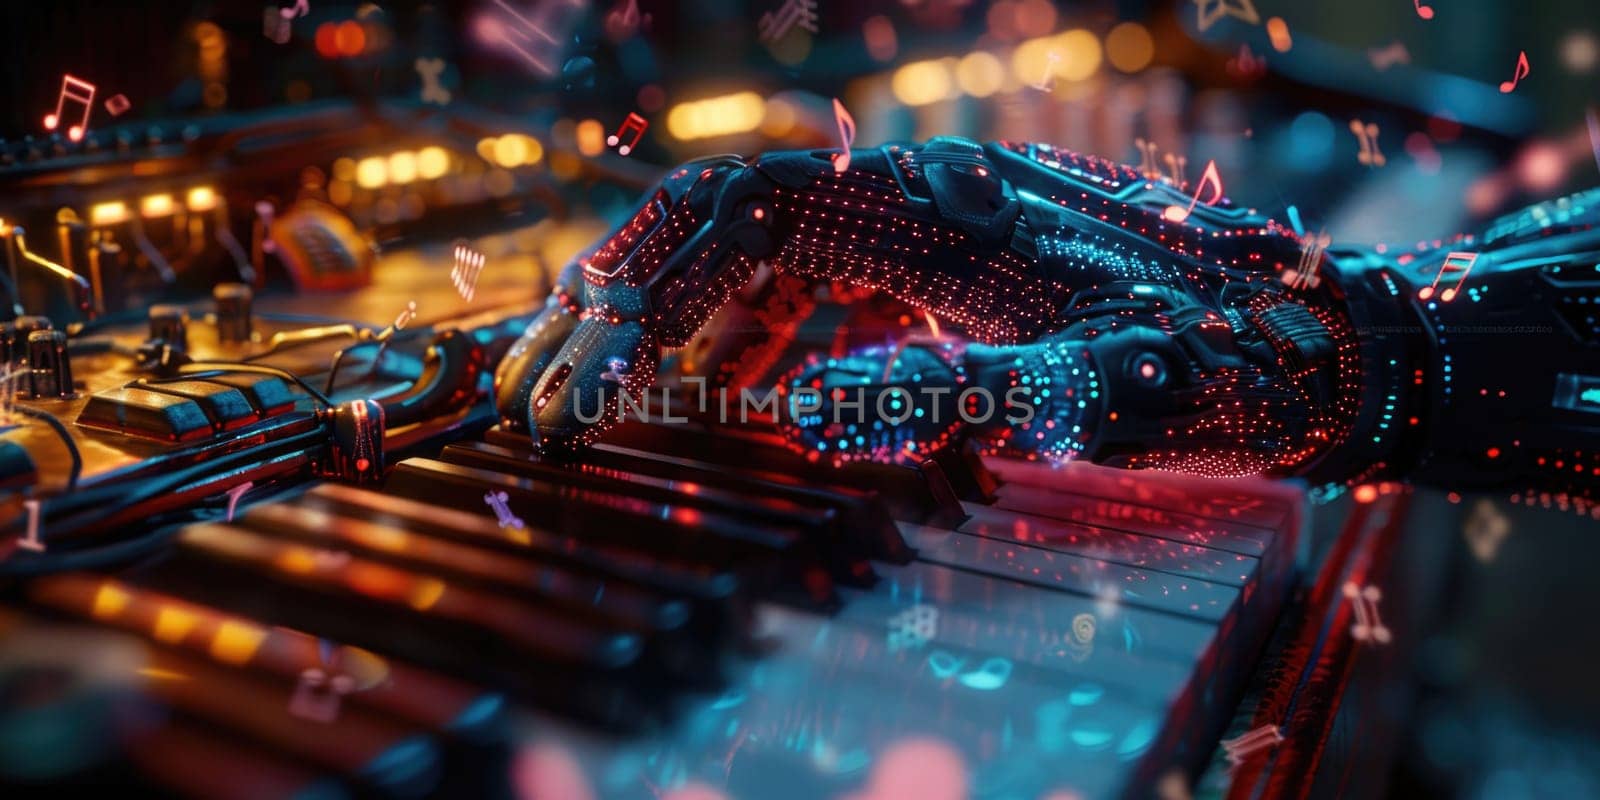 Detailed view of a keyboard with vibrant lights illuminated on the keys, showcasing a futuristic and modern design.